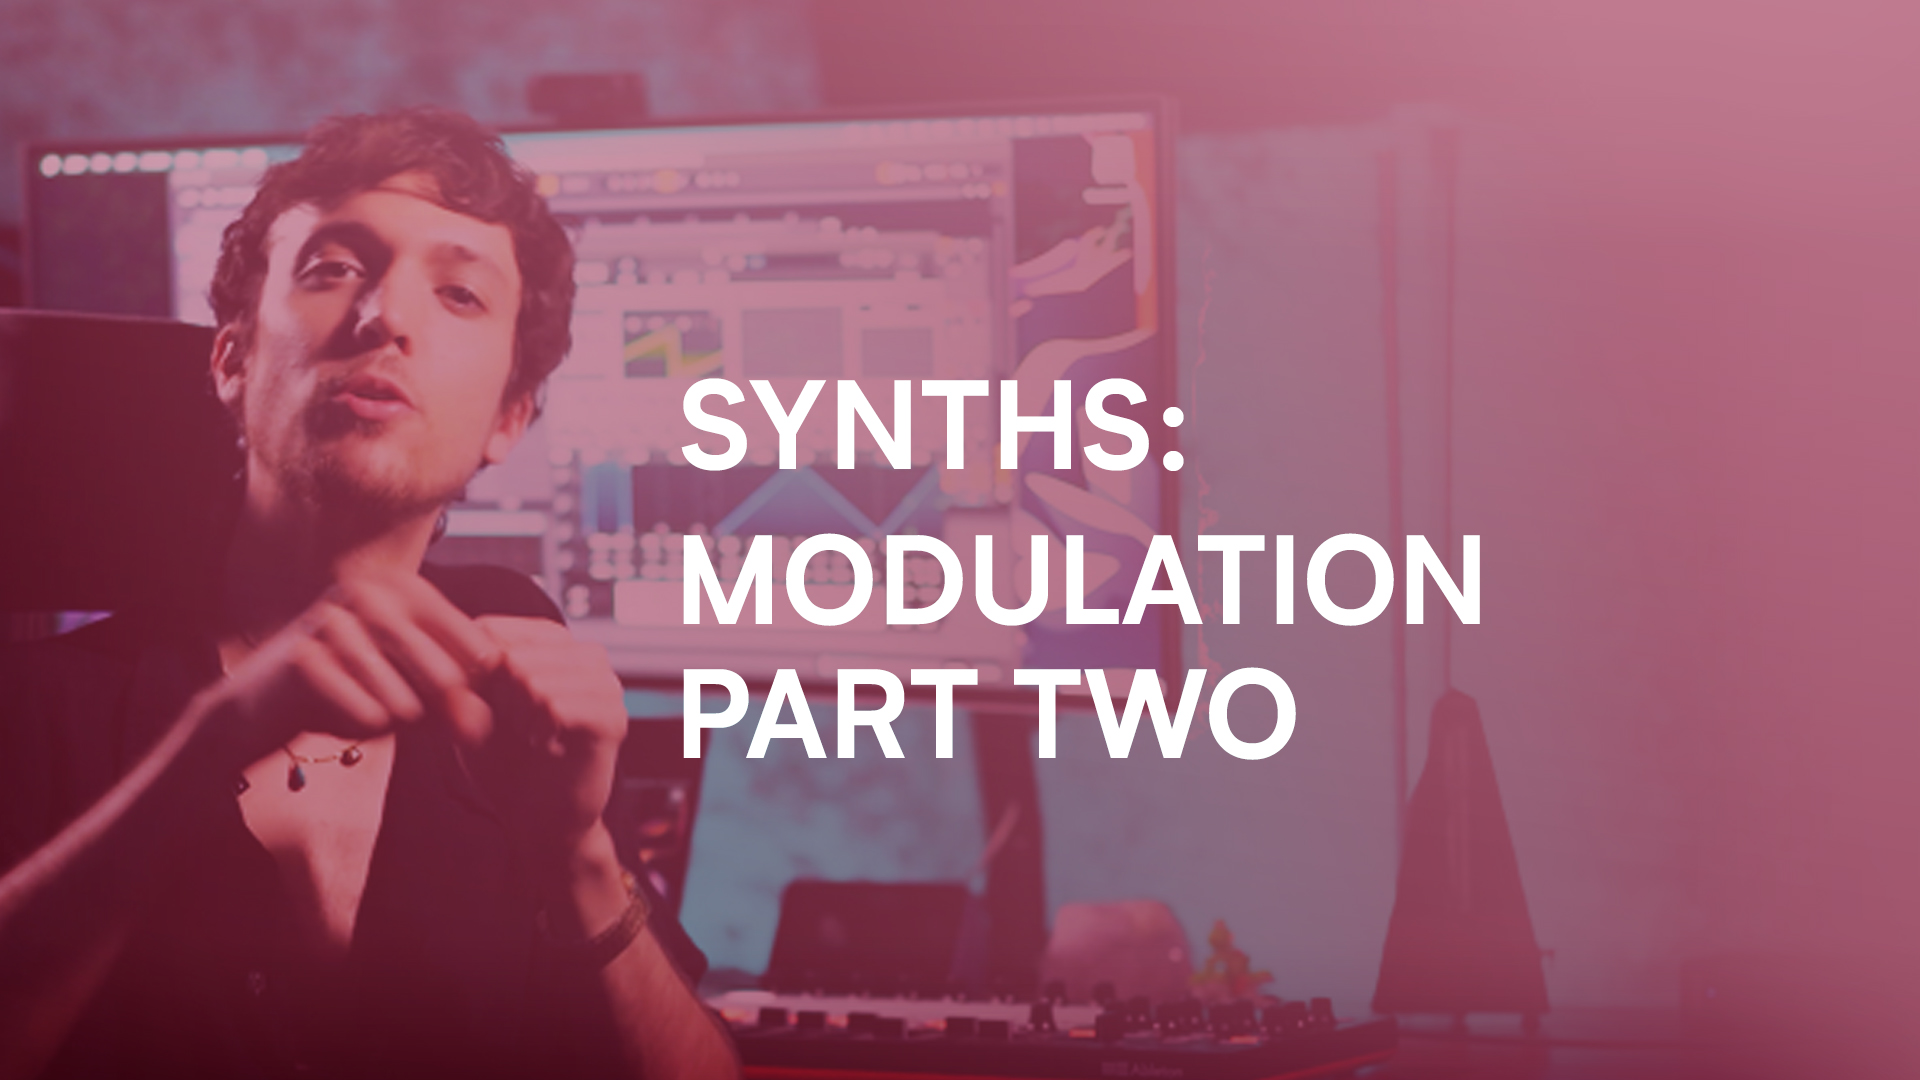 MODULATION PART TWO